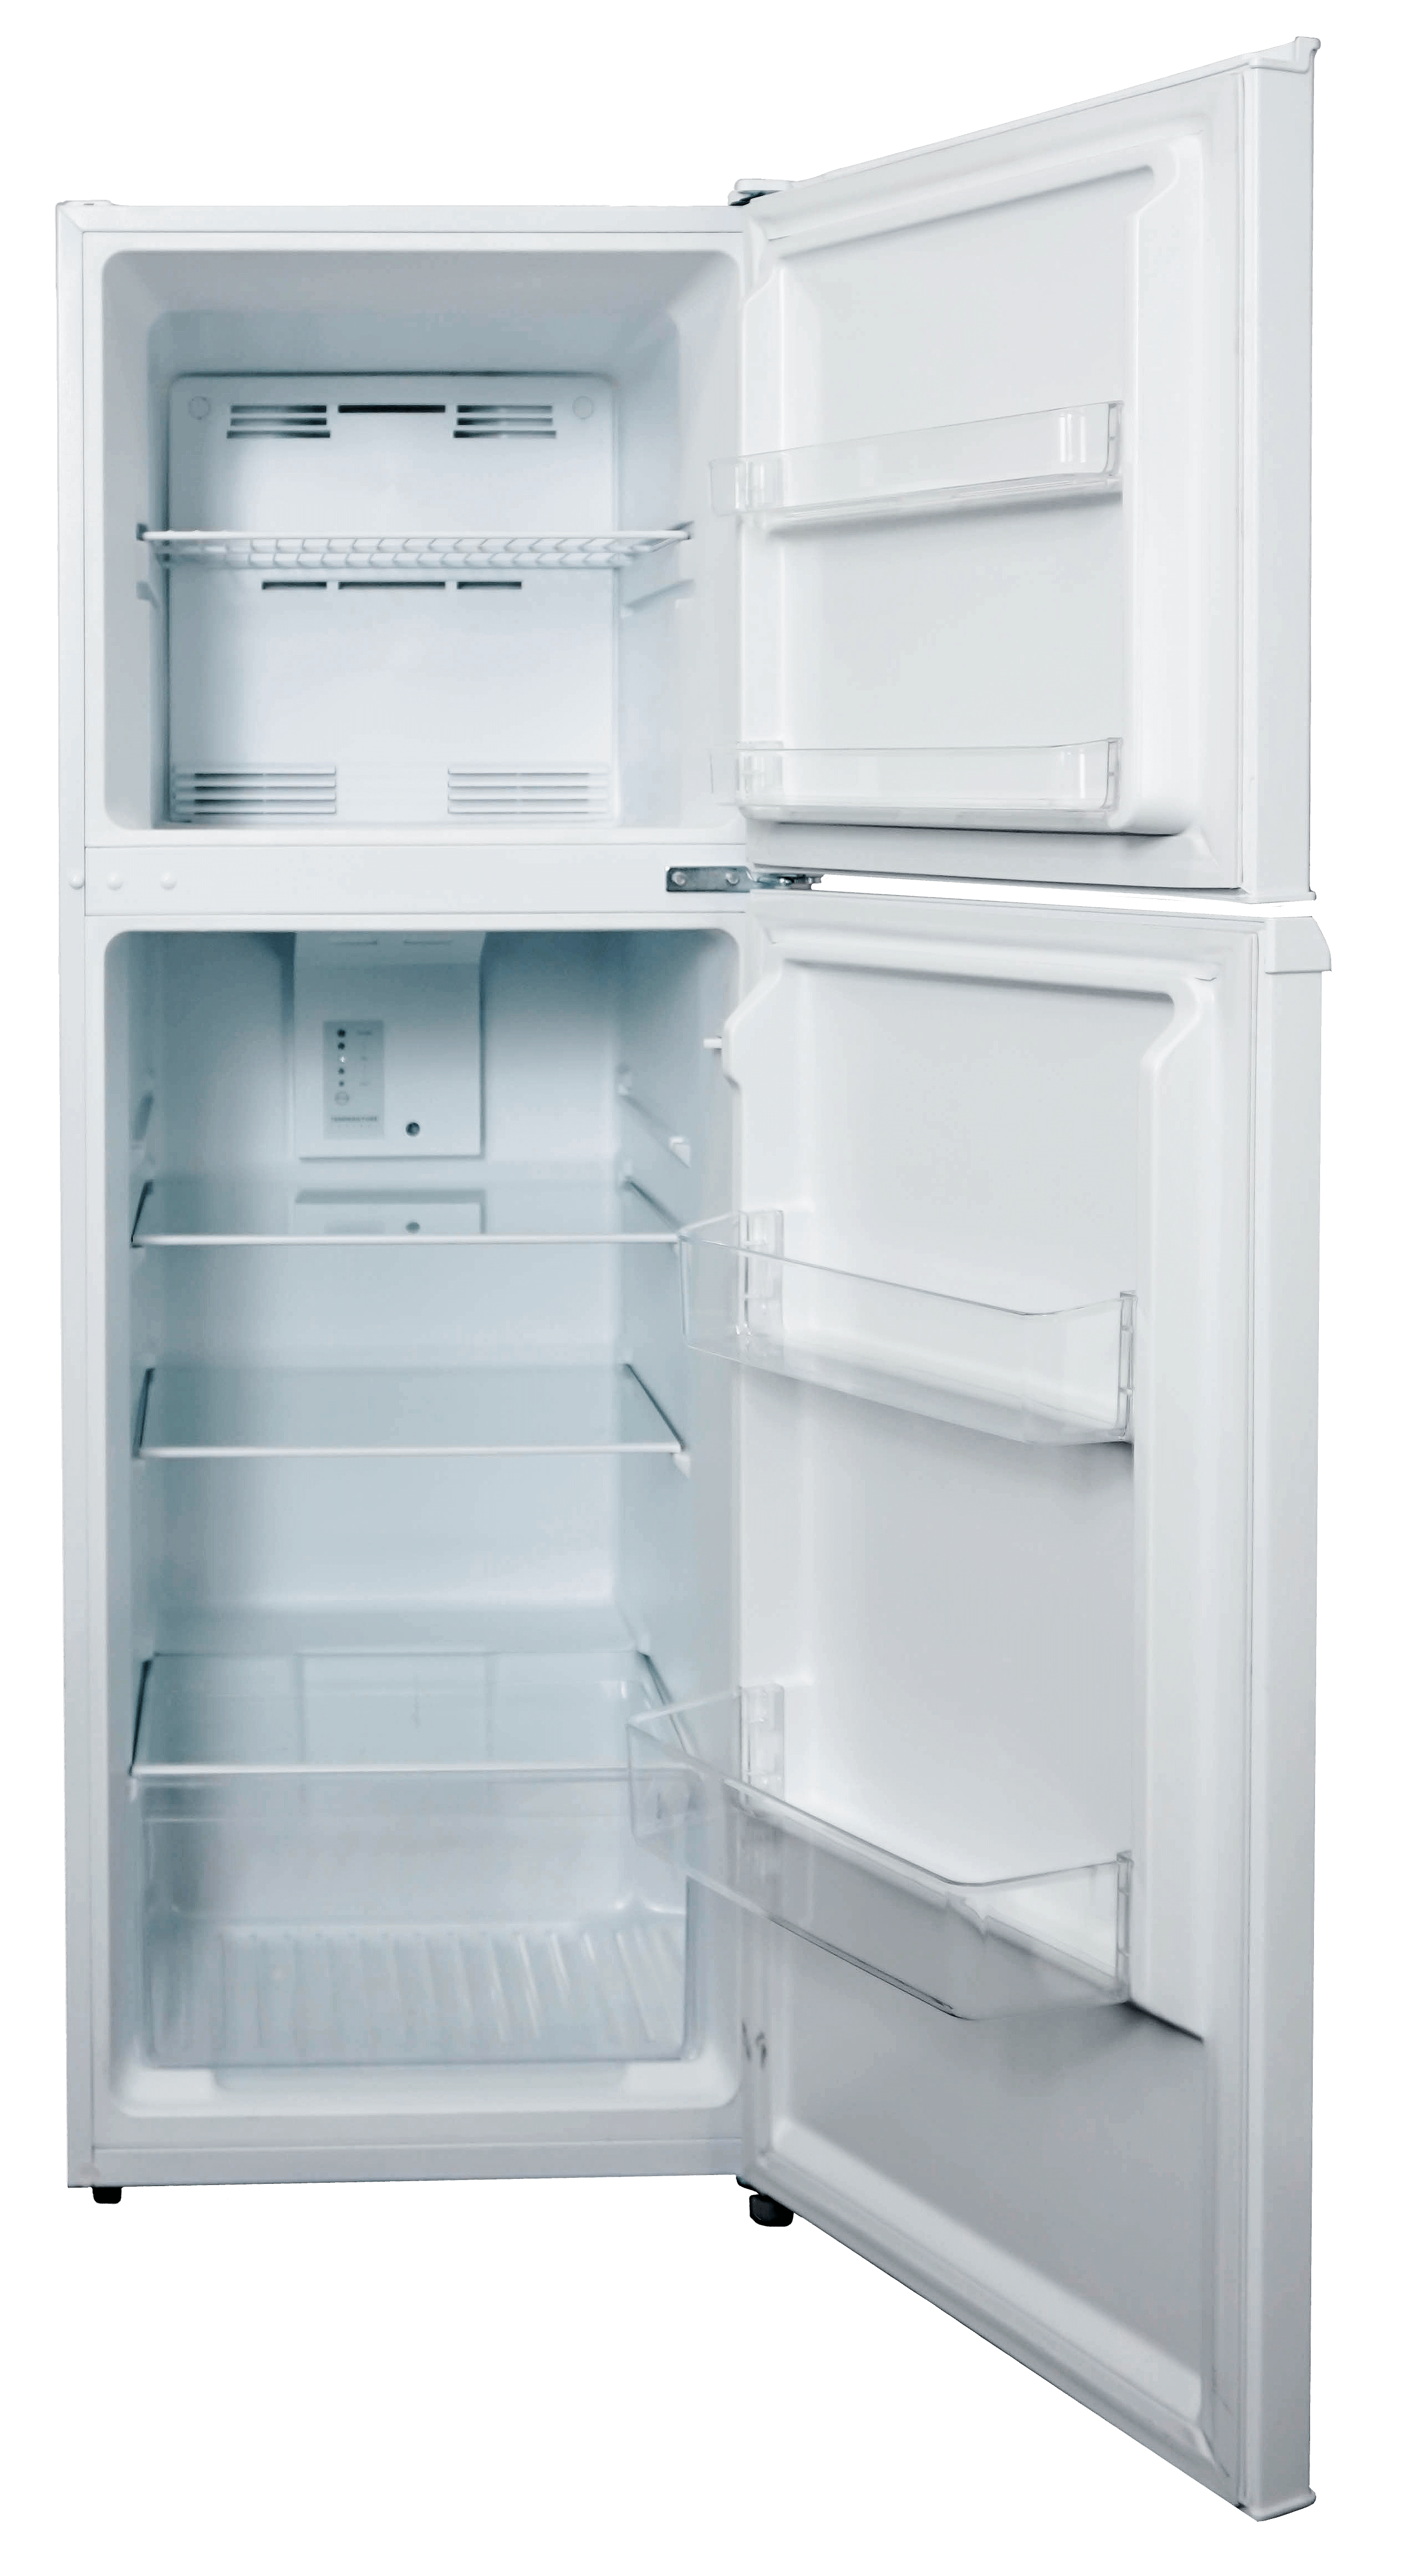 Danby 7.0 cu ft Frost Free Refrigerator